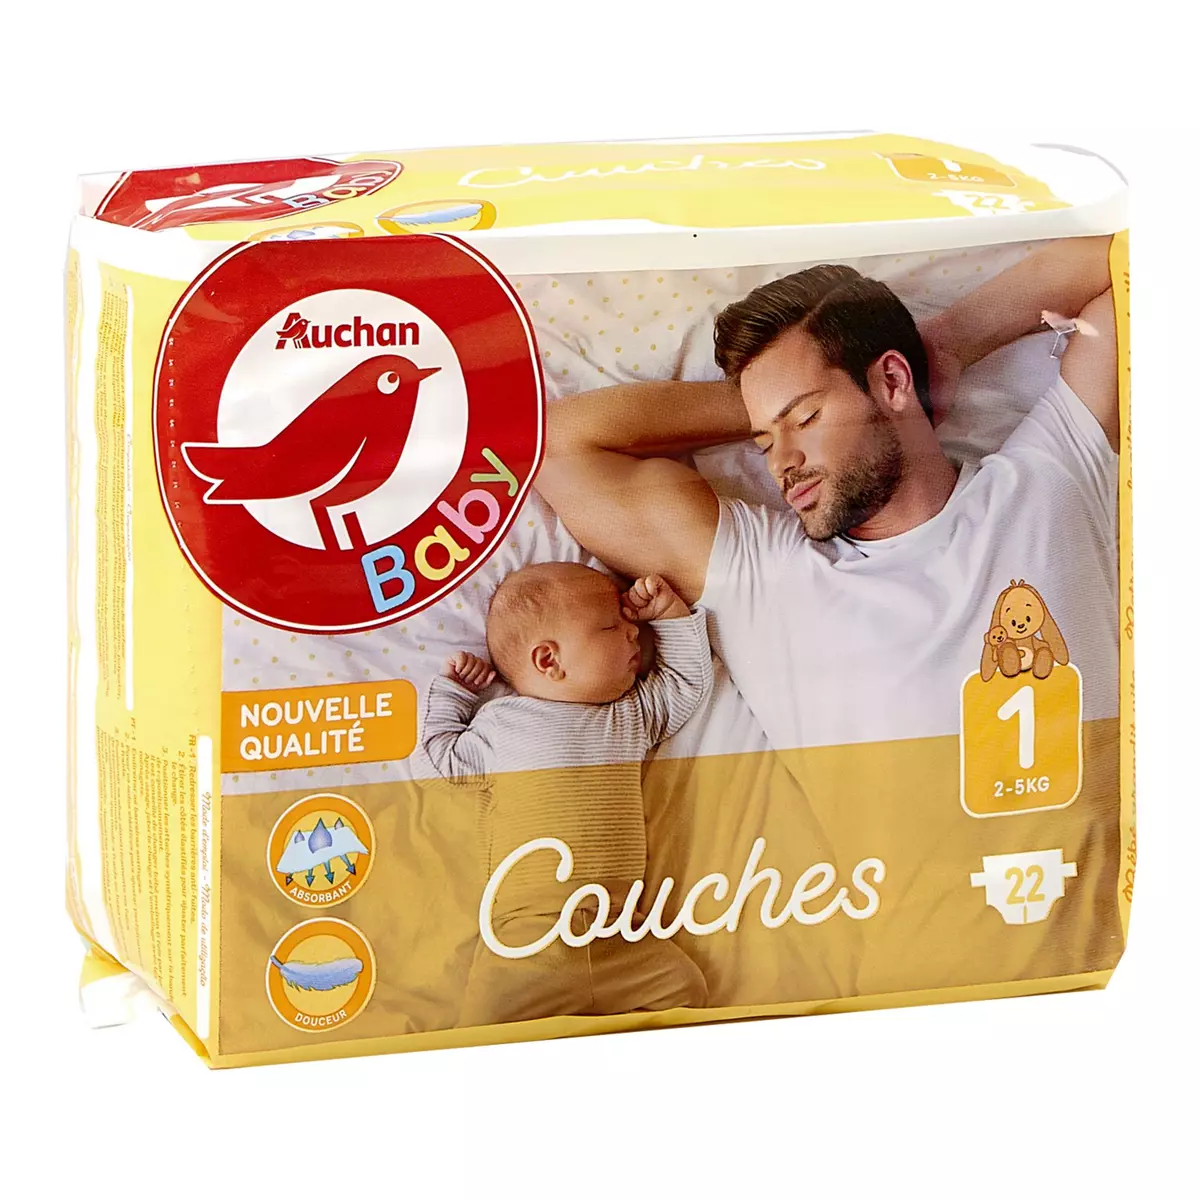 PAMPERS Premium protection couches taille 1 (2-5kg) 96 couches pas cher 